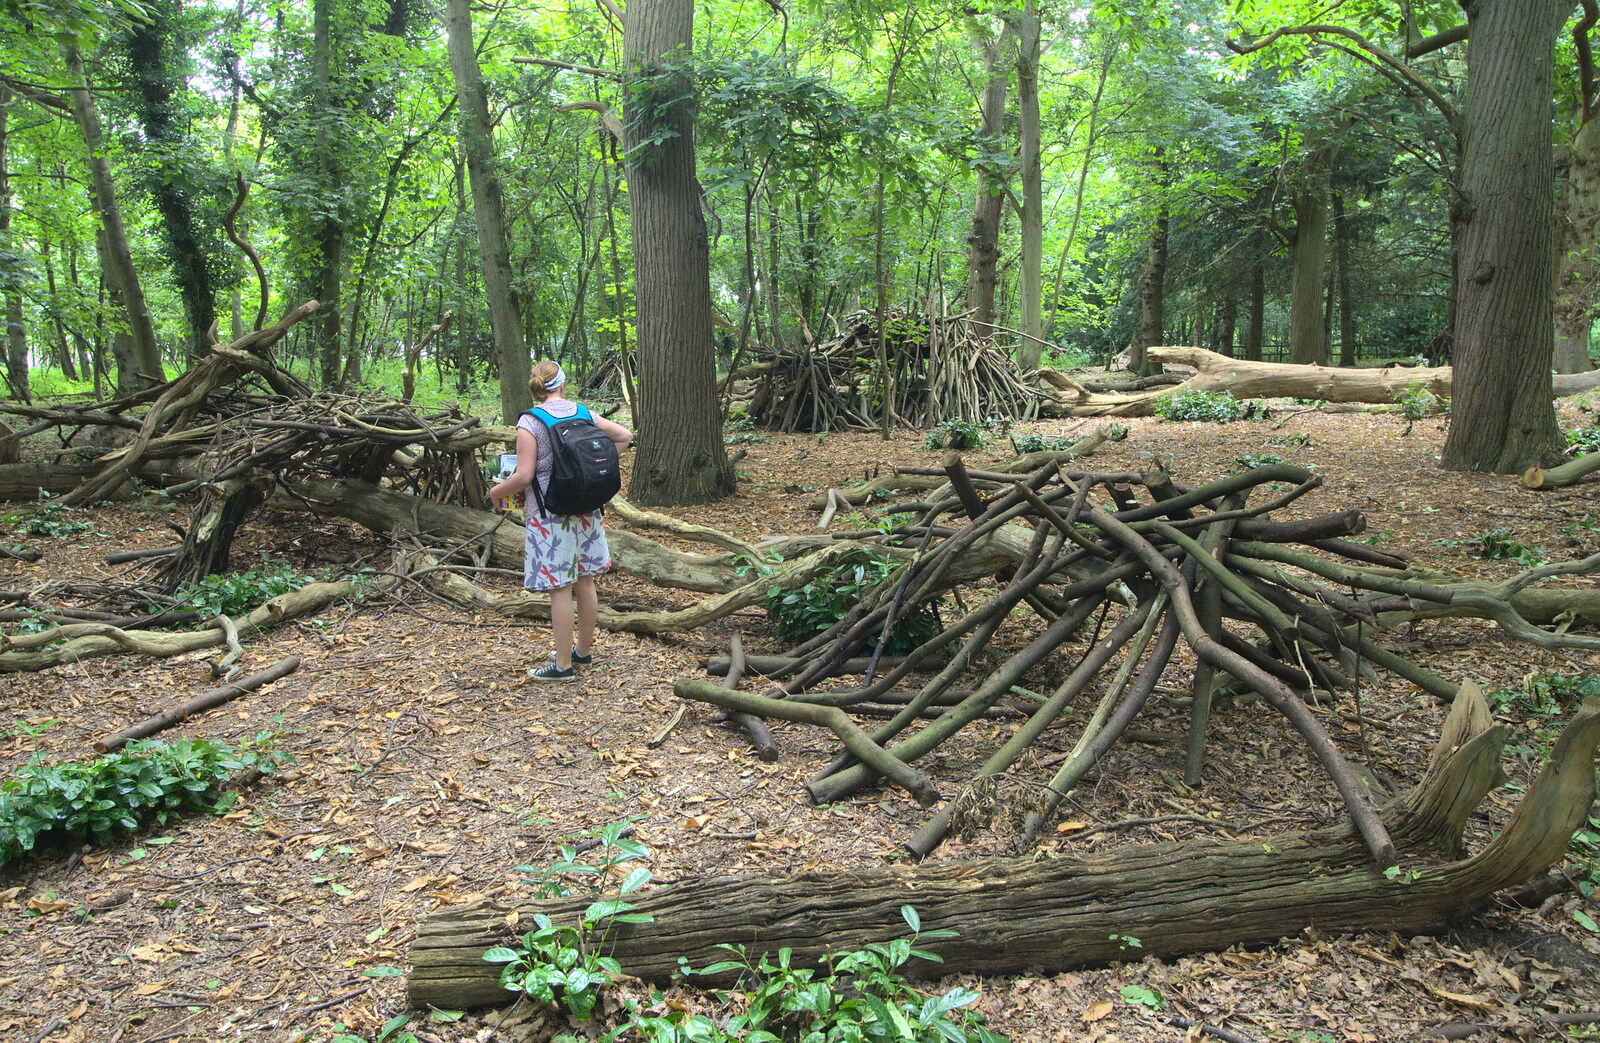 Multiple dens in the woods from Camping by the Seaside, Cliff House, Dunwich, Suffolk - 15th August 2012